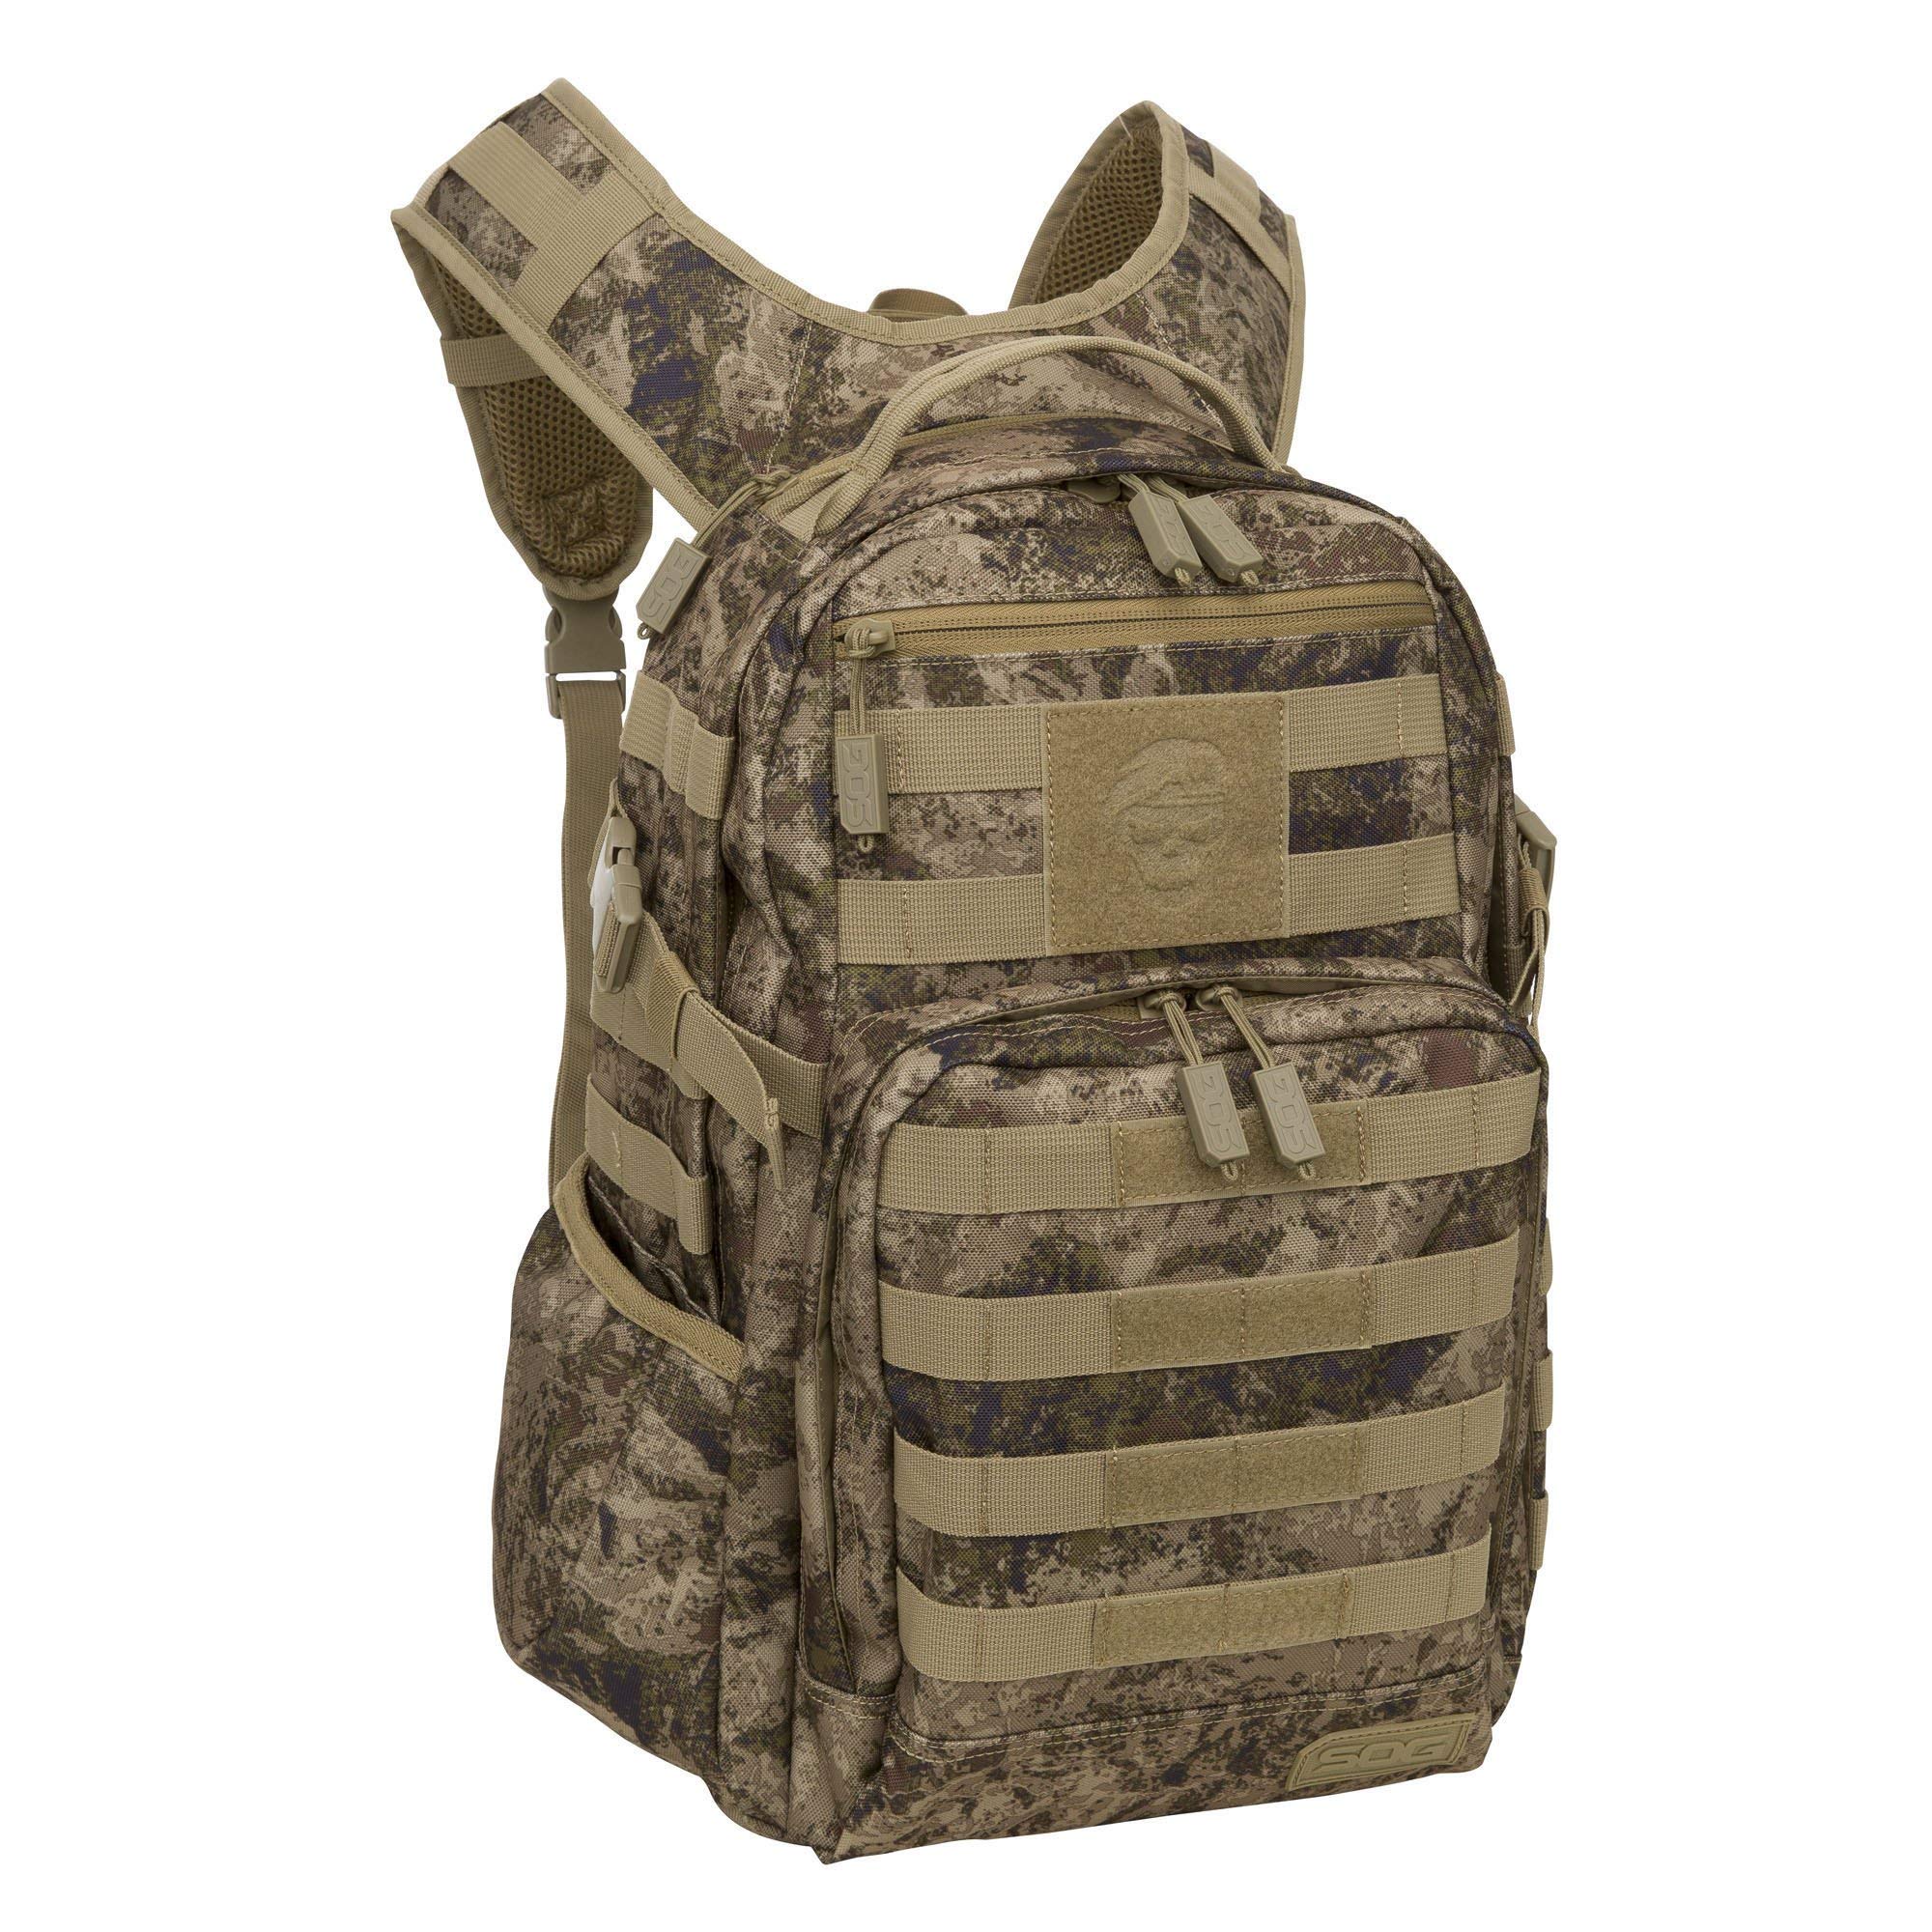 SOg Specialty Knives & Tools SOg Ninja Tactical Daypack Backpack, canyon camo, One Size